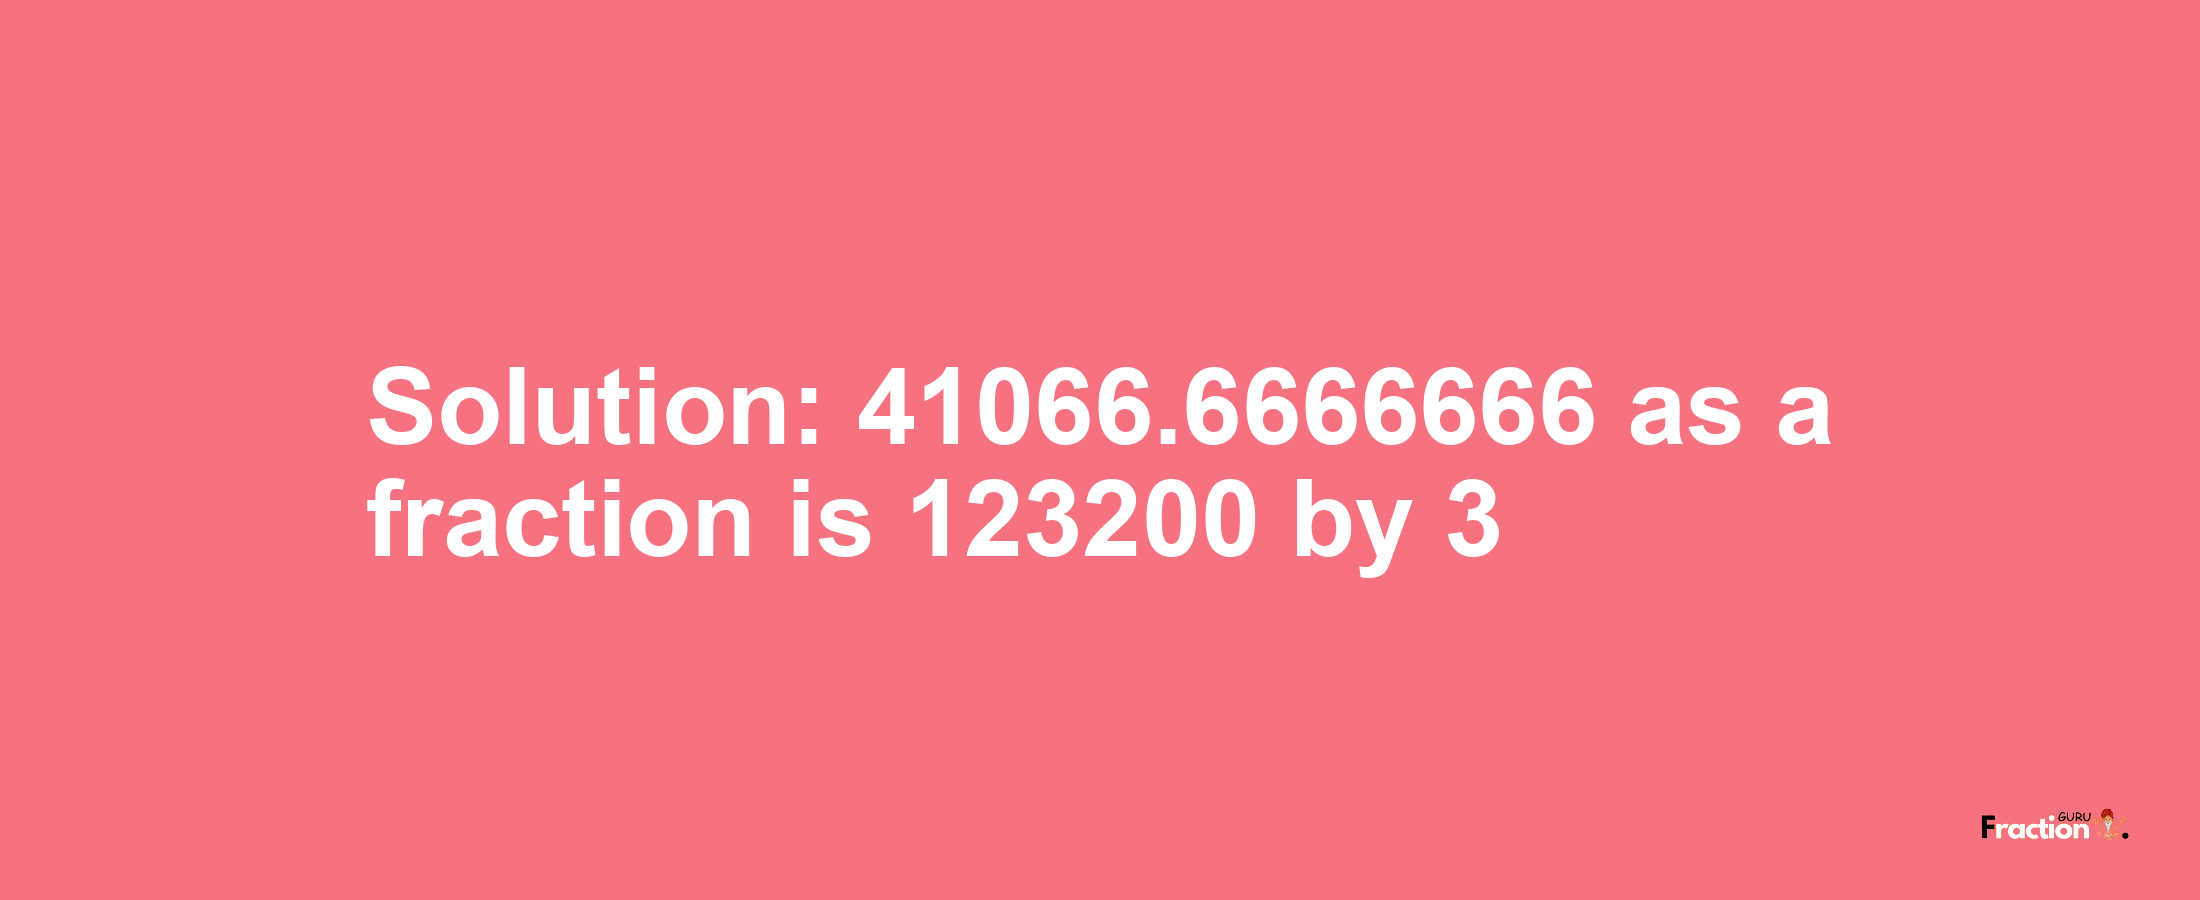 Solution:41066.6666666 as a fraction is 123200/3